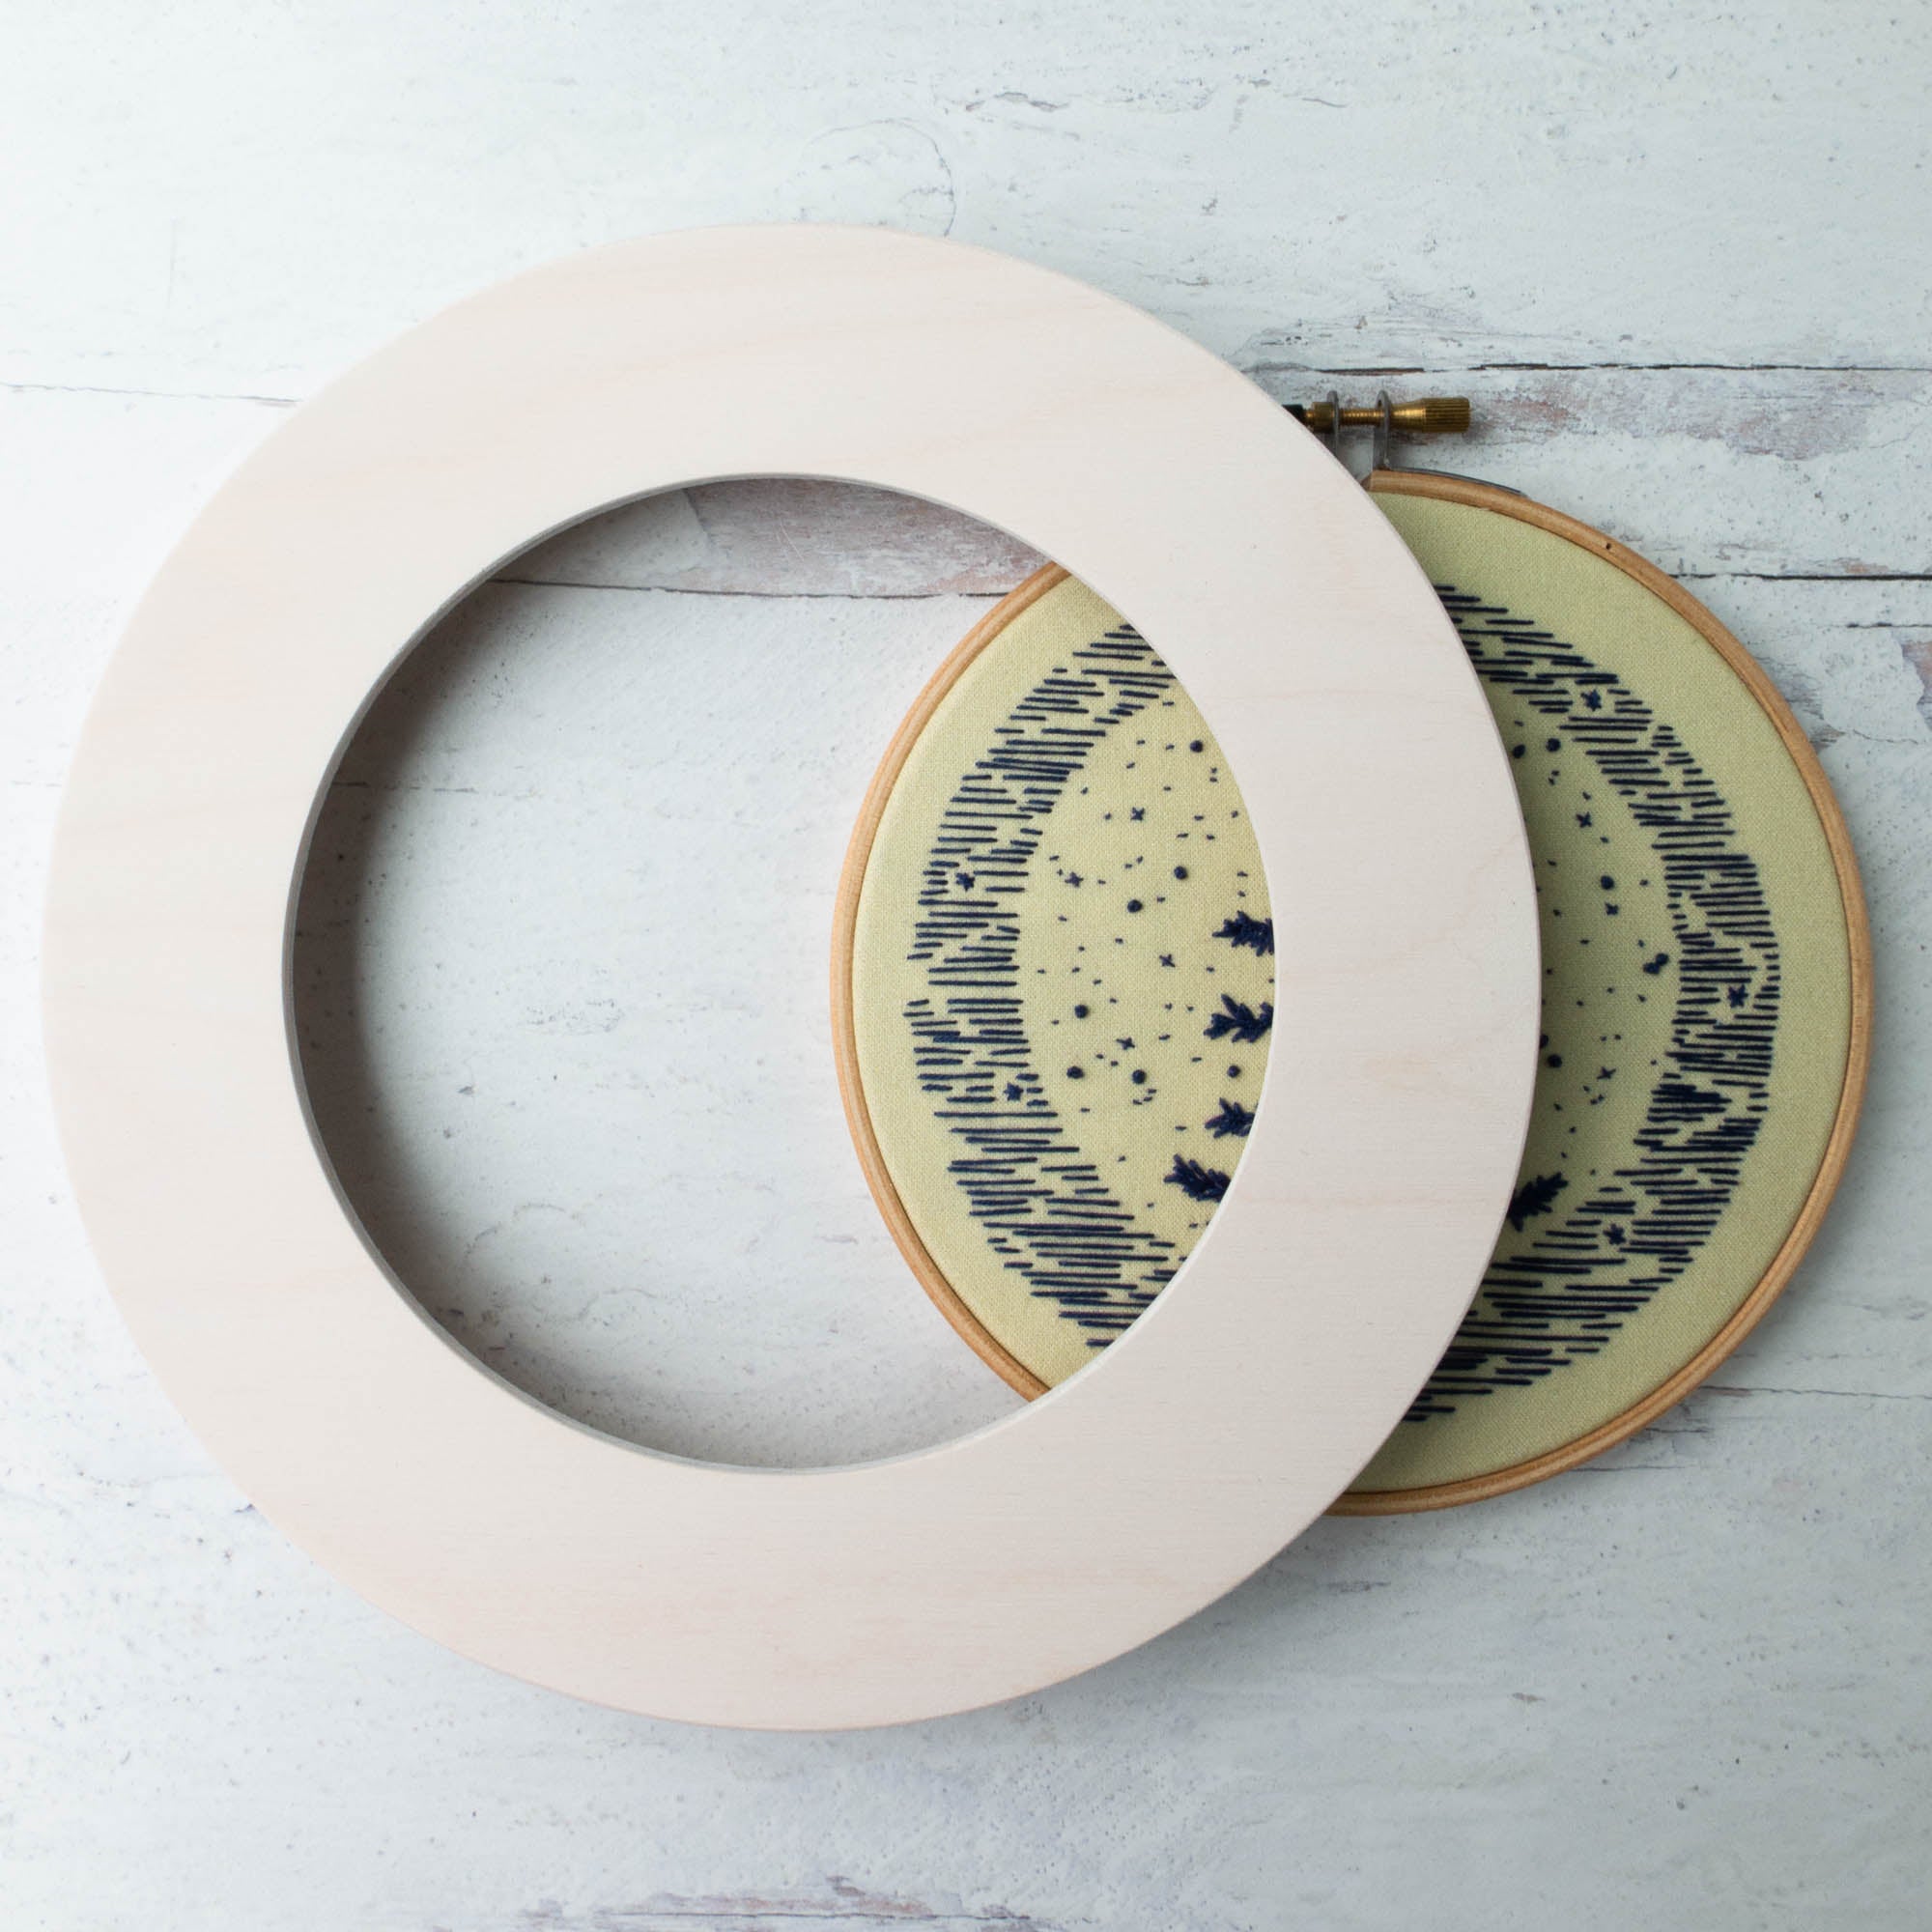 Round Embroidery Hoop Frame - 6 inch - Stitched Modern